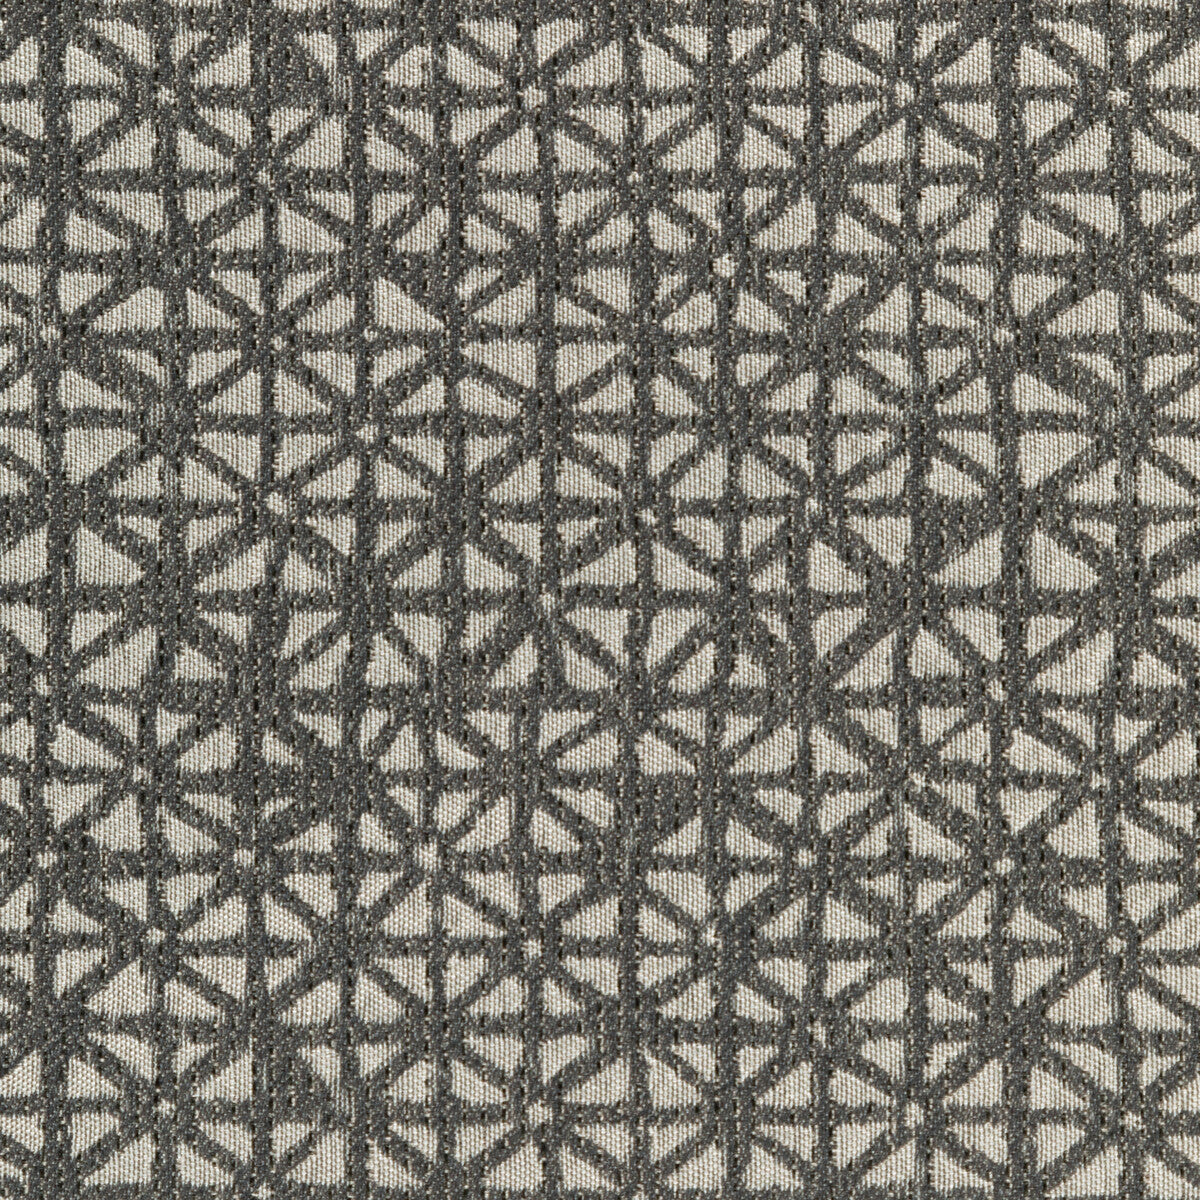 Kinzie fabric in iron color - pattern 36268.21.0 - by Kravet Contract in the Gis Crypton collection